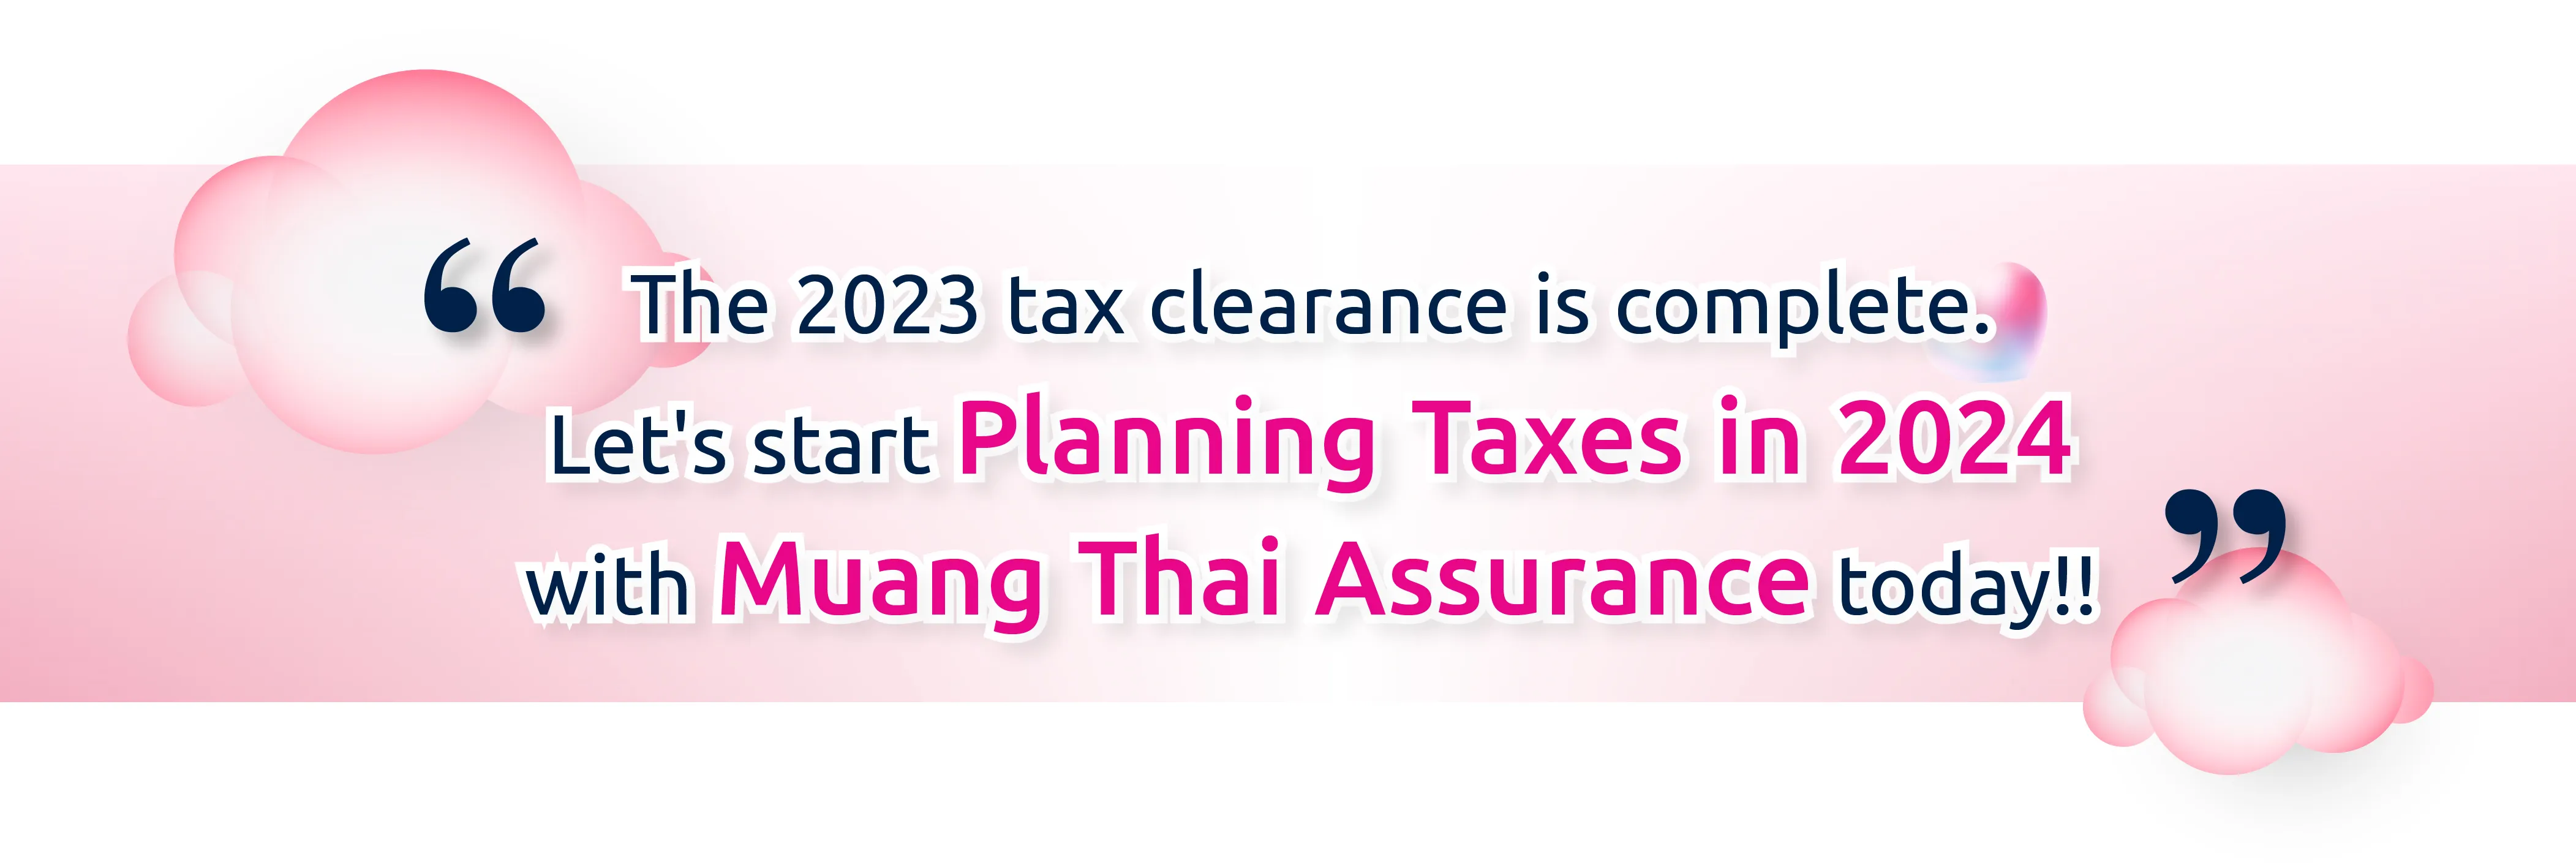 The 2023 tax clearance is complete. Let's start Planning Taxes in 2024 with Muang Thai Assurance today!!